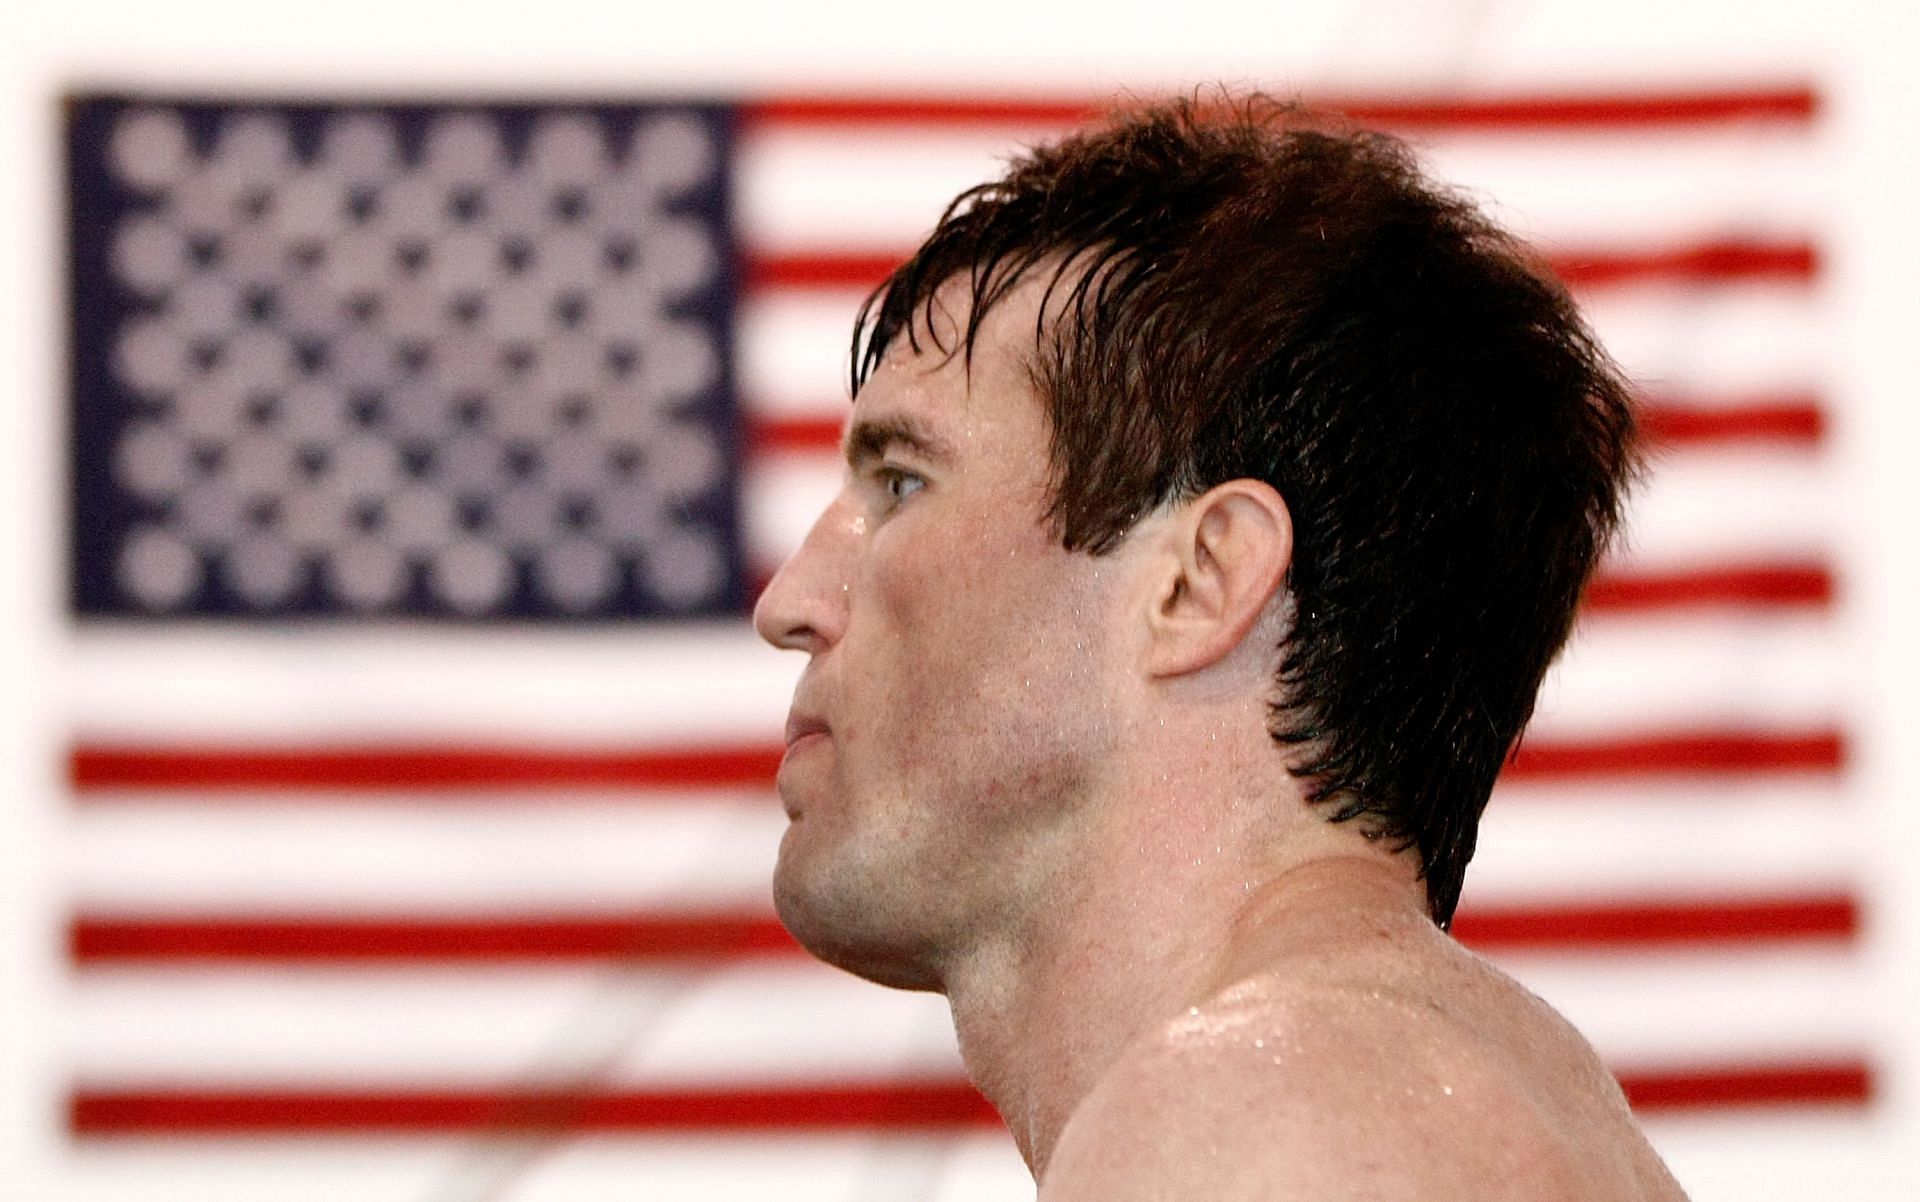 Twitter celebrates after Chael Sonnen gets cleared of charges